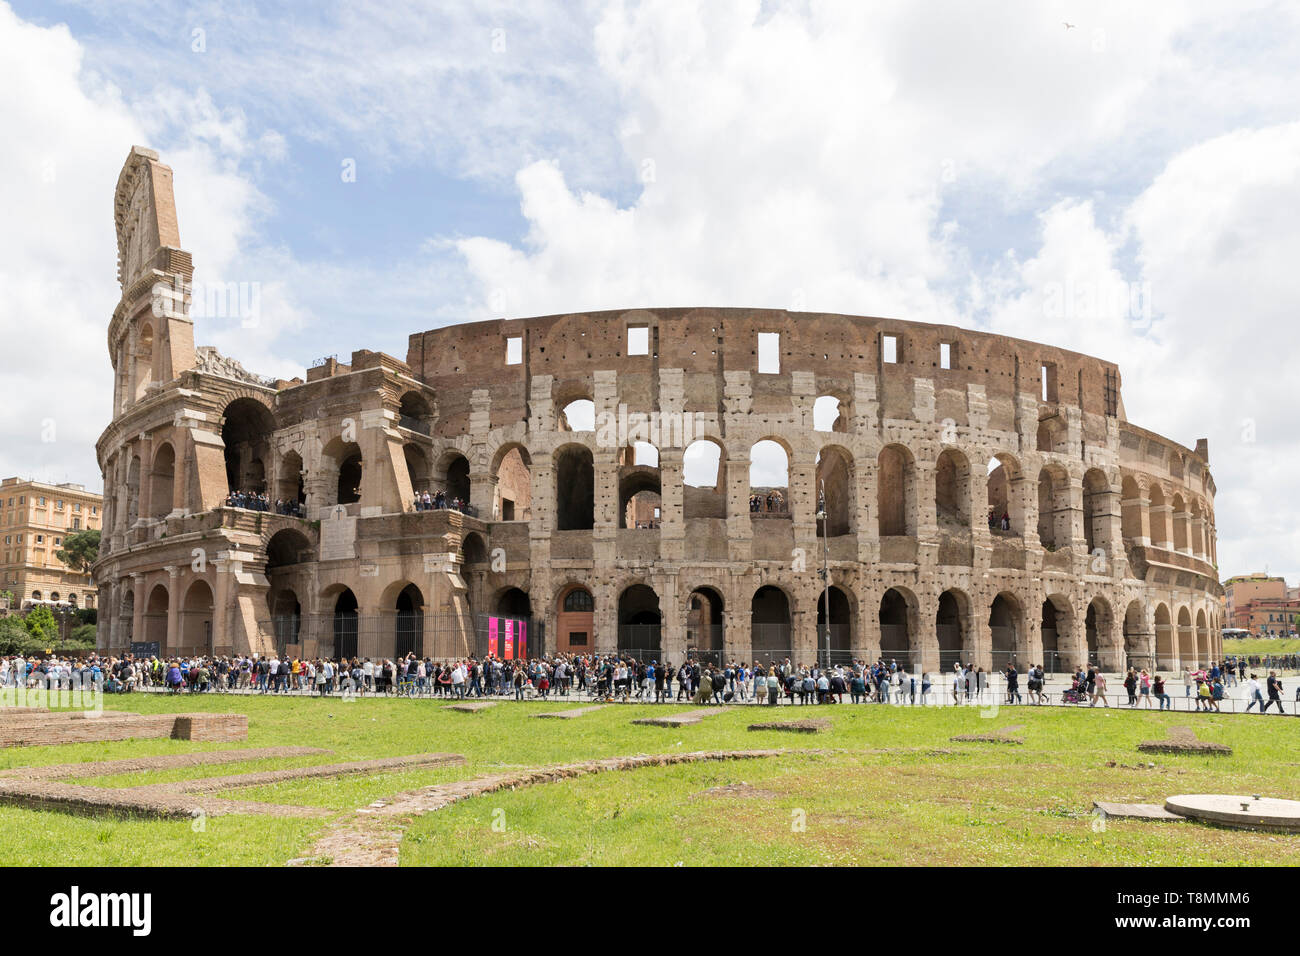 Italy, Rome: Roman vestiges of the Colosseum (or Coliseum), Colosseo, tourist site registered as a UNESCO World Heritage Site Stock Photo